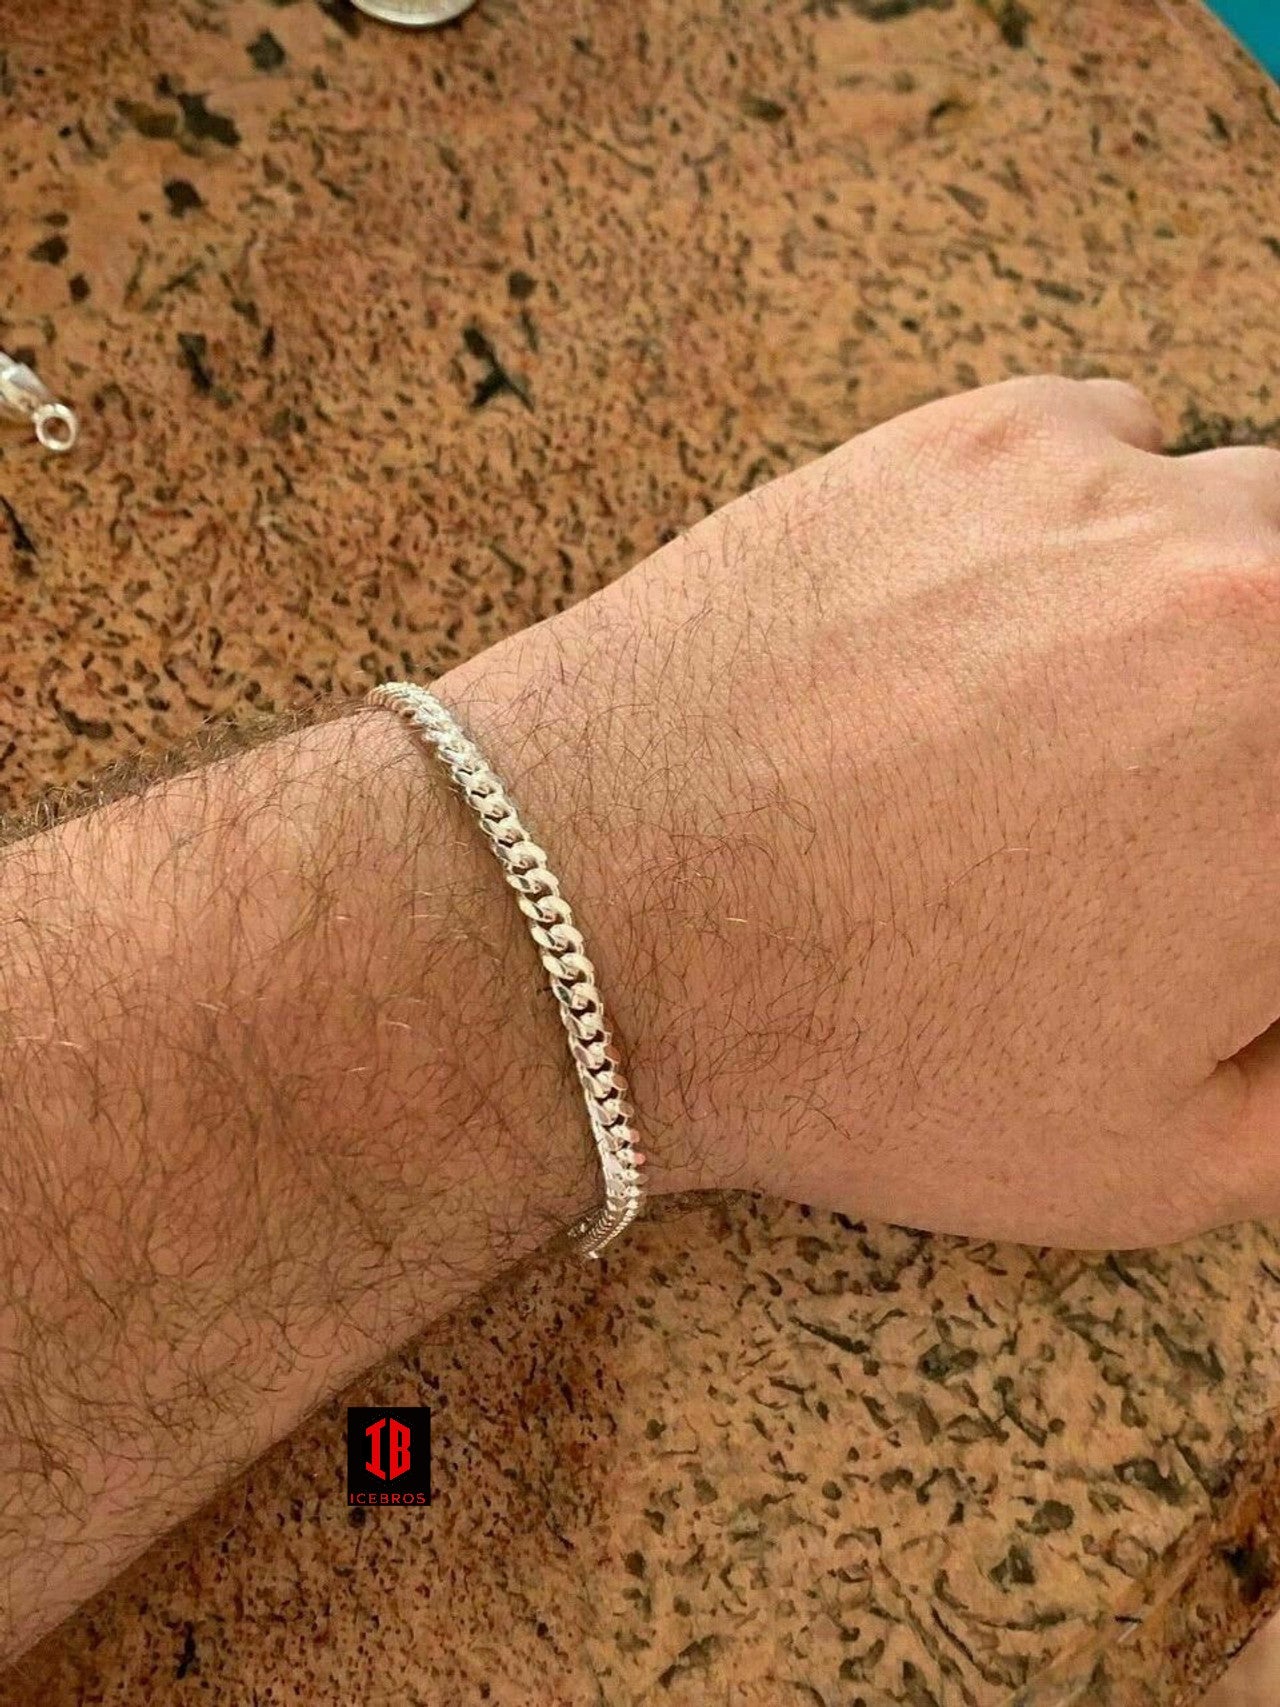 WHITE GOLD (LOBSTER CLASP) Mens Real Solid 925 Sterling Silver Miami Cuban Bracelet 5-12mm 7-9" Heavy Link